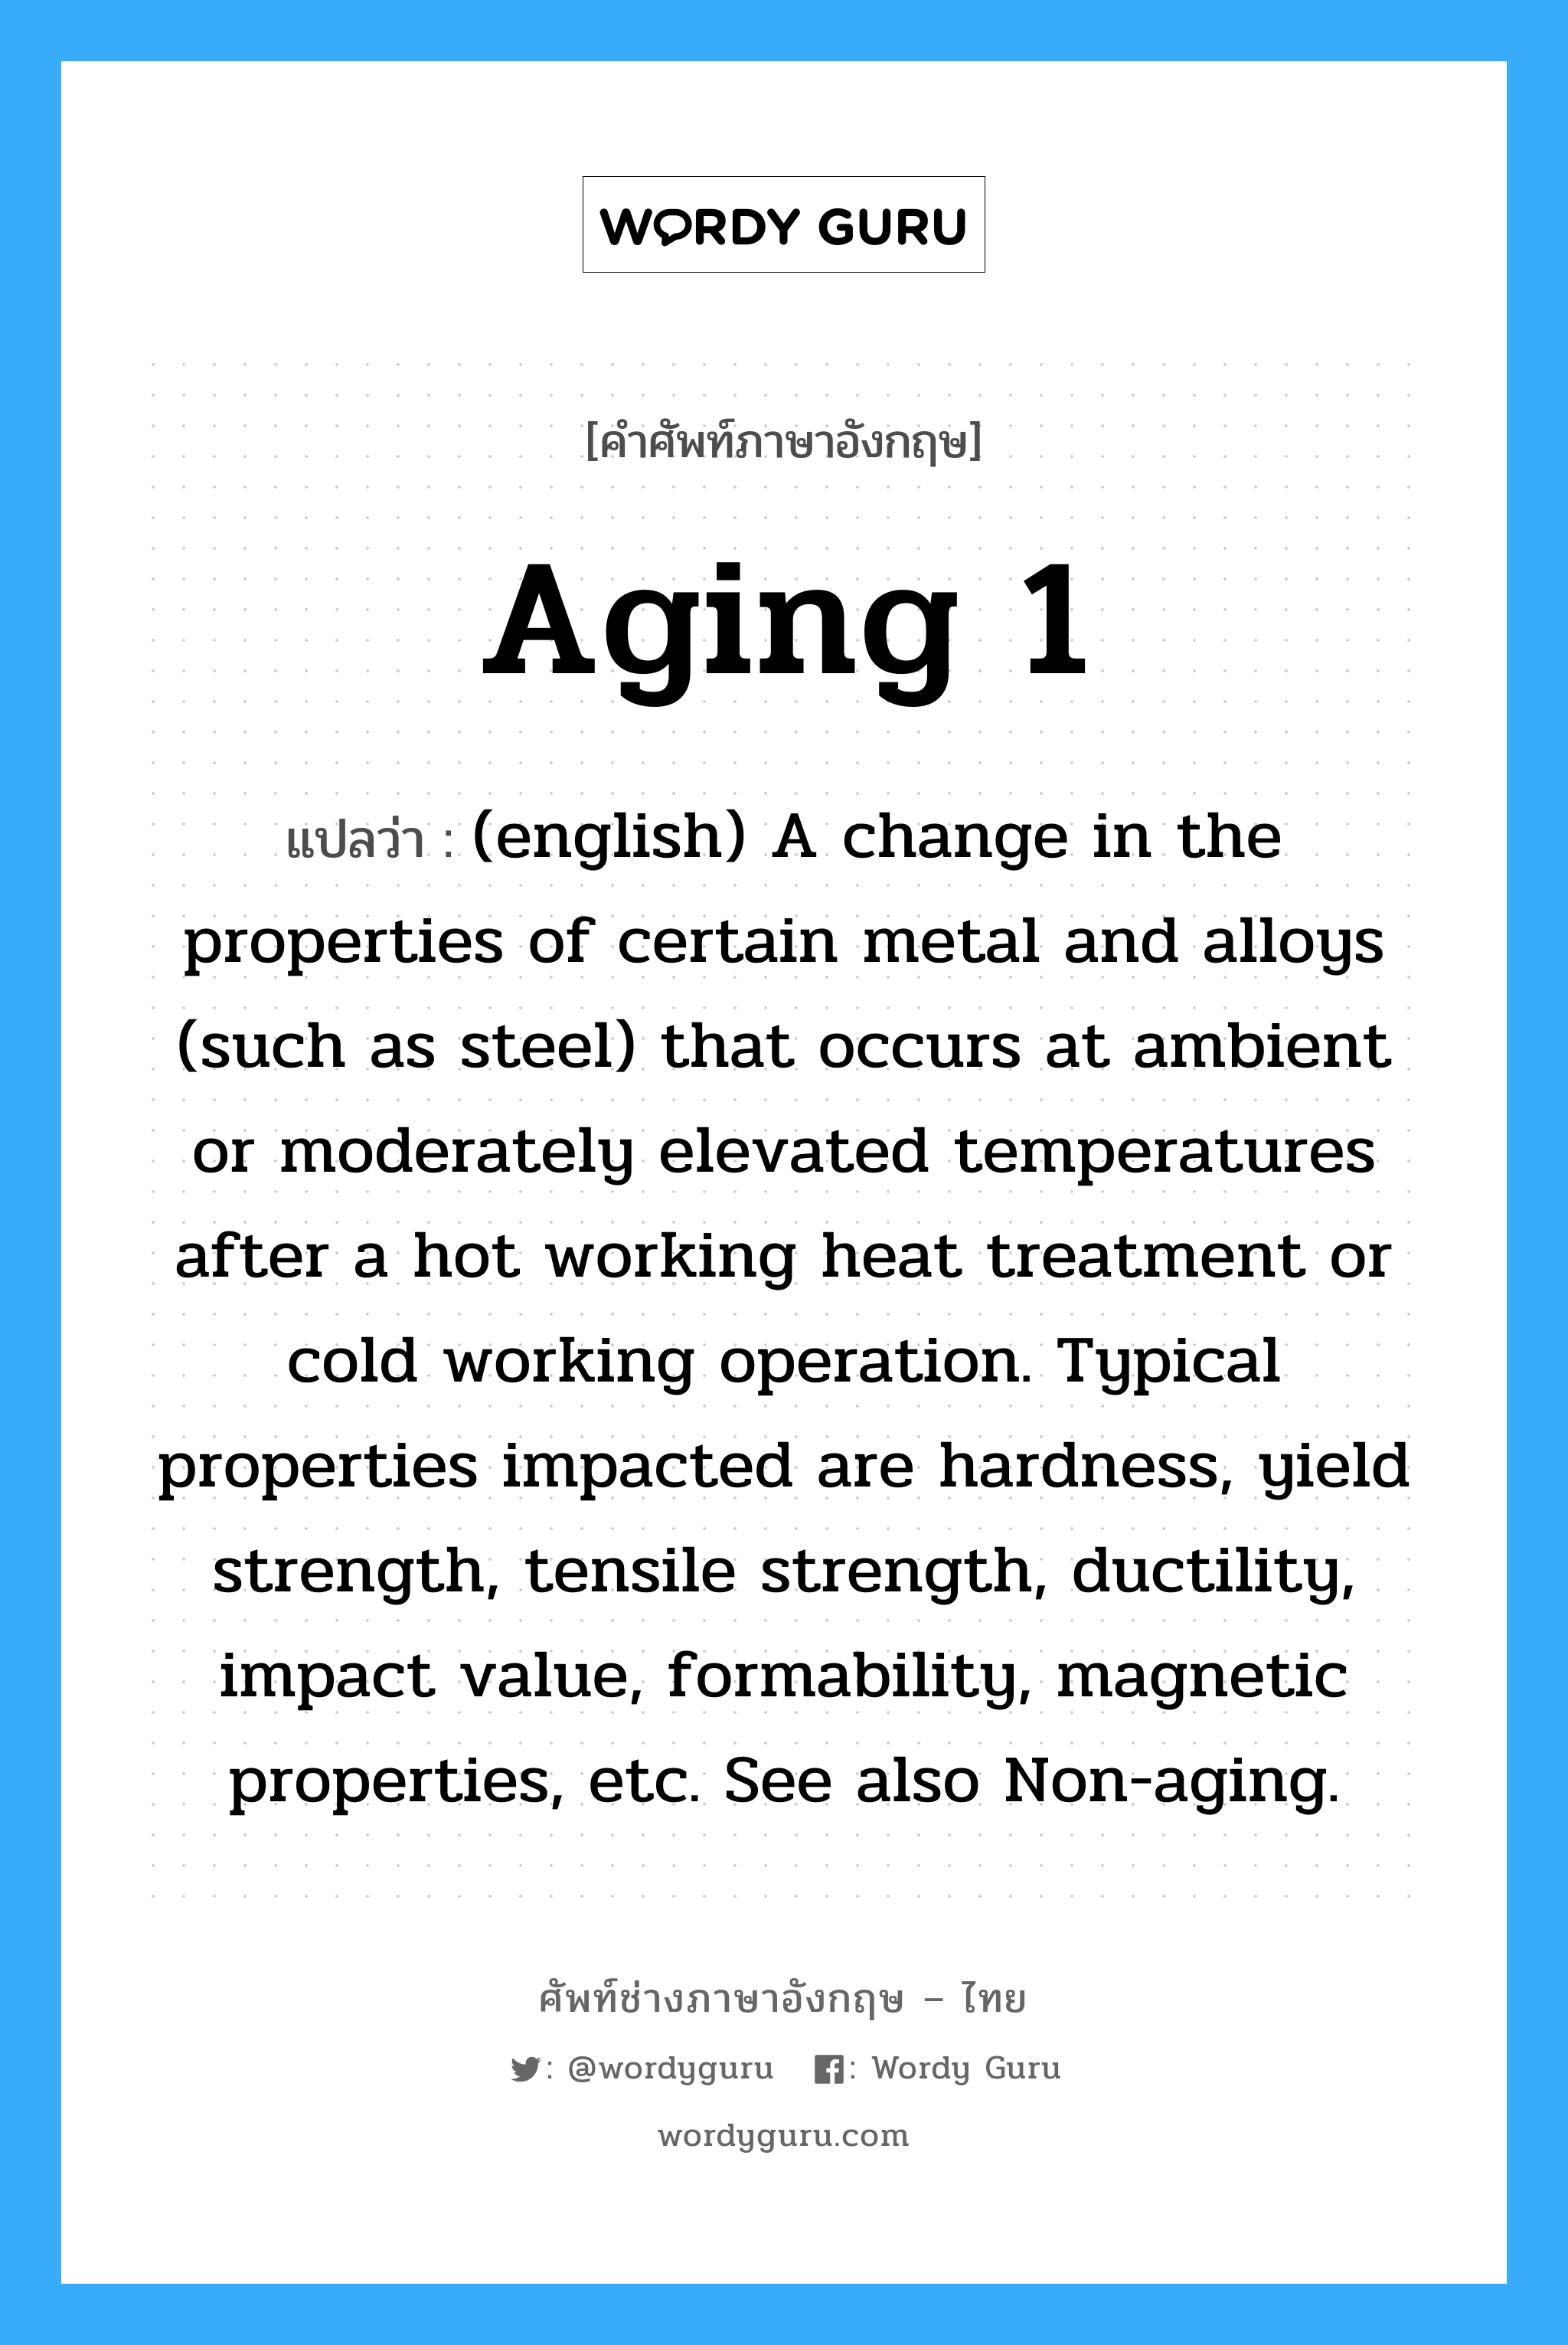 Aging 1 แปลว่า?, คำศัพท์ช่างภาษาอังกฤษ - ไทย Aging 1 คำศัพท์ภาษาอังกฤษ Aging 1 แปลว่า (english) A change in the properties of certain metal and alloys (such as steel) that occurs at ambient or moderately elevated temperatures after a hot working heat treatment or cold working operation. Typical properties impacted are hardness, yield strength, tensile strength, ductility, impact value, formability, magnetic properties, etc. See also Non-aging.